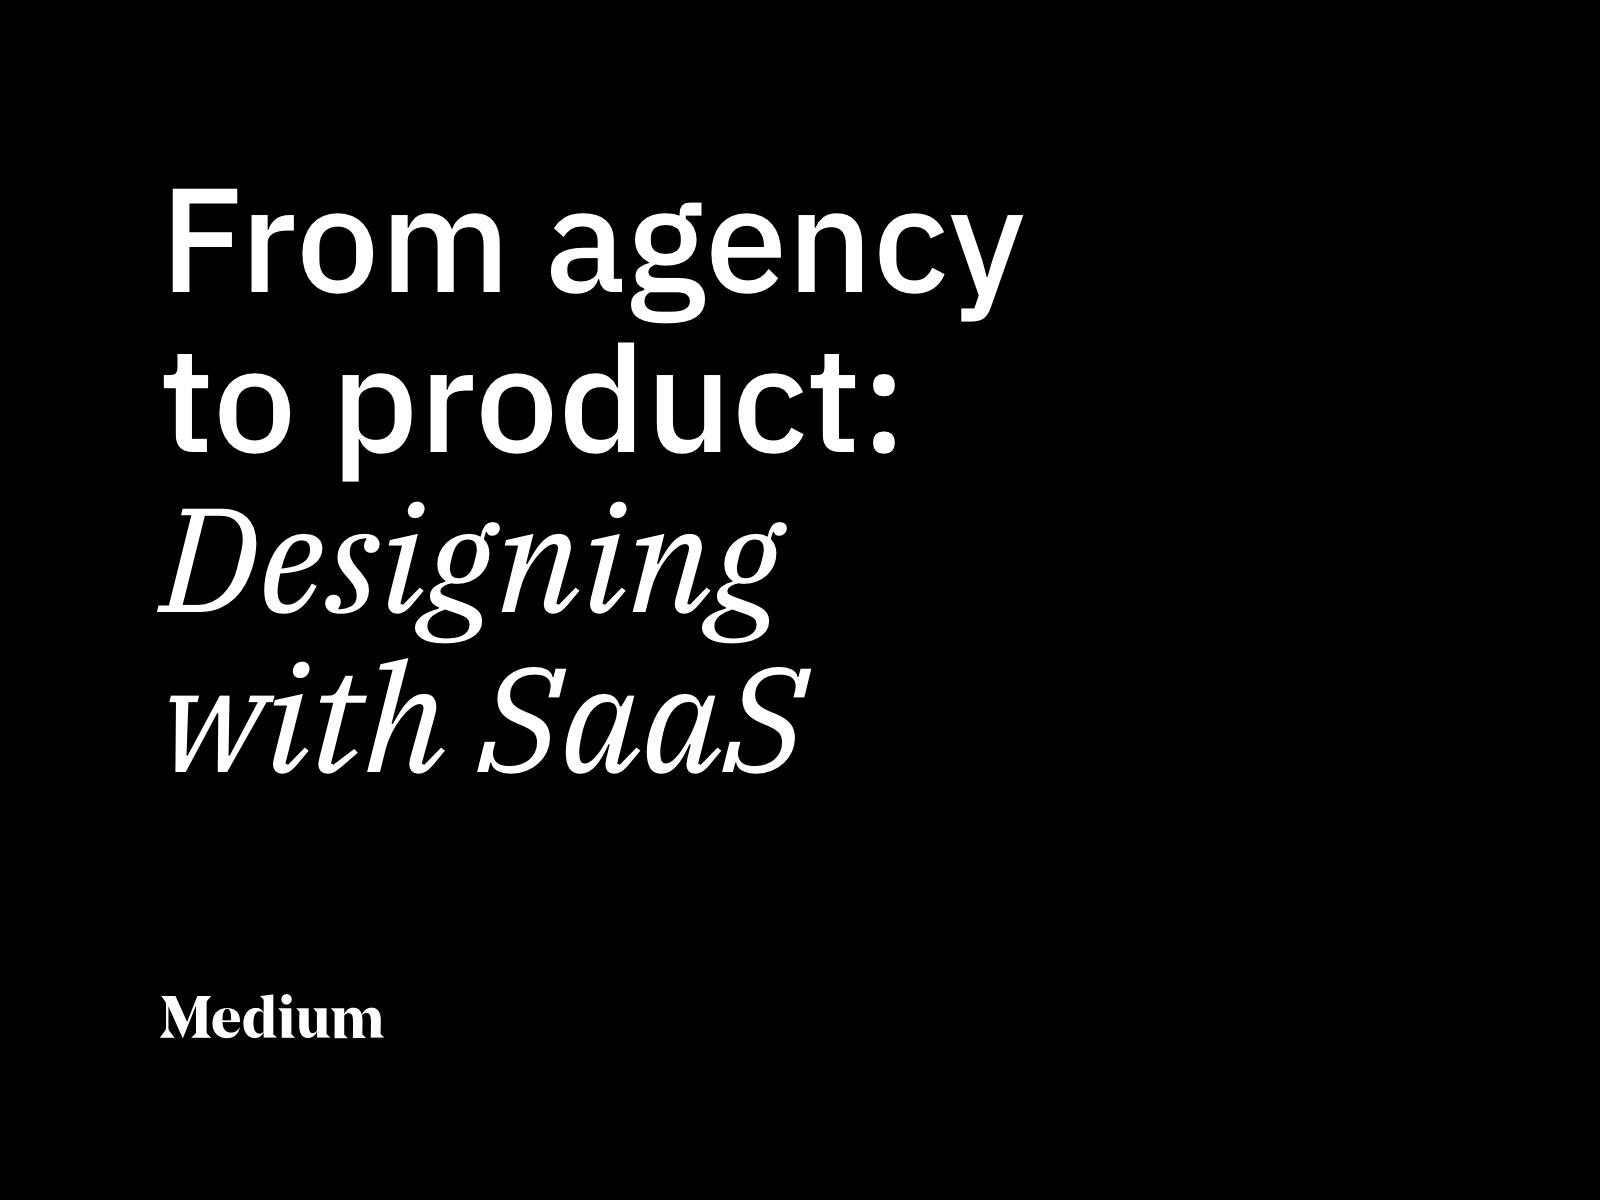 From agency to product: Designing with SaaS